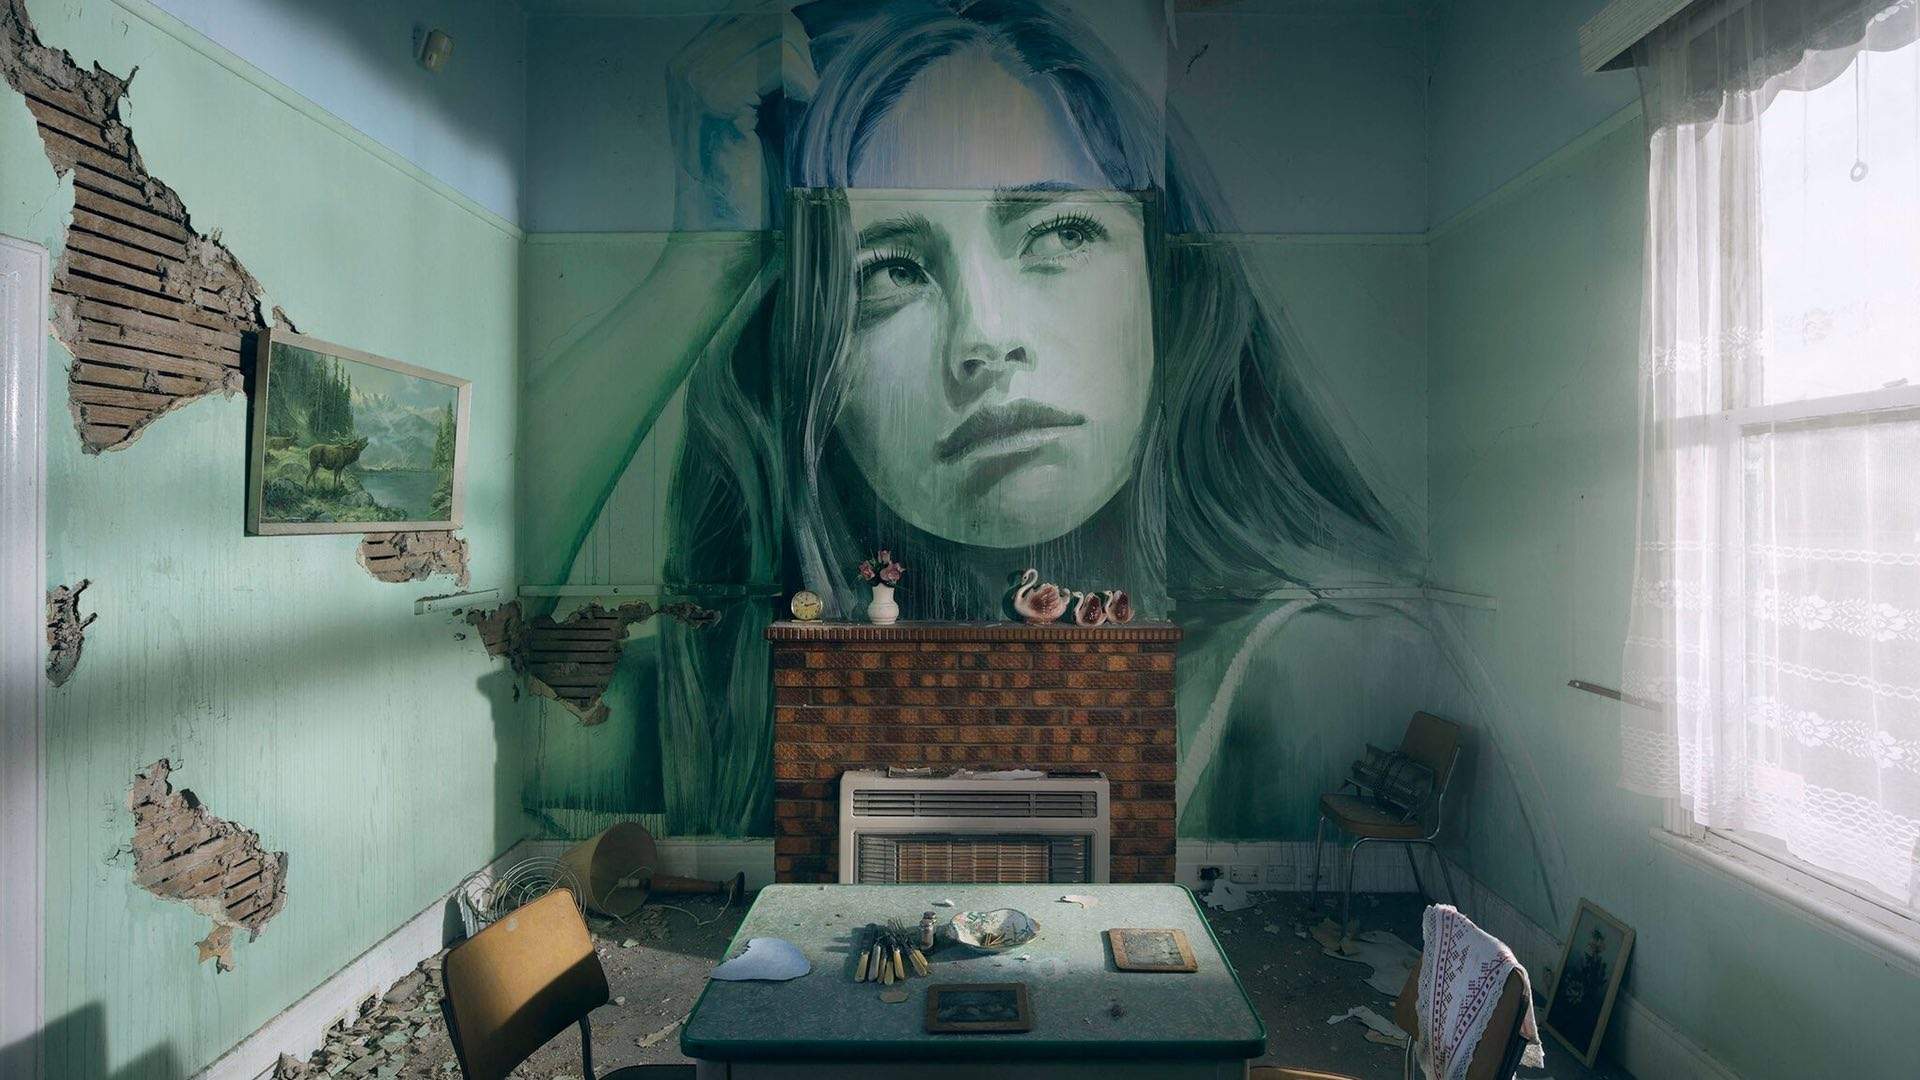 This New Street Art Exhibition Takes Place in an Abandoned Melbourne House